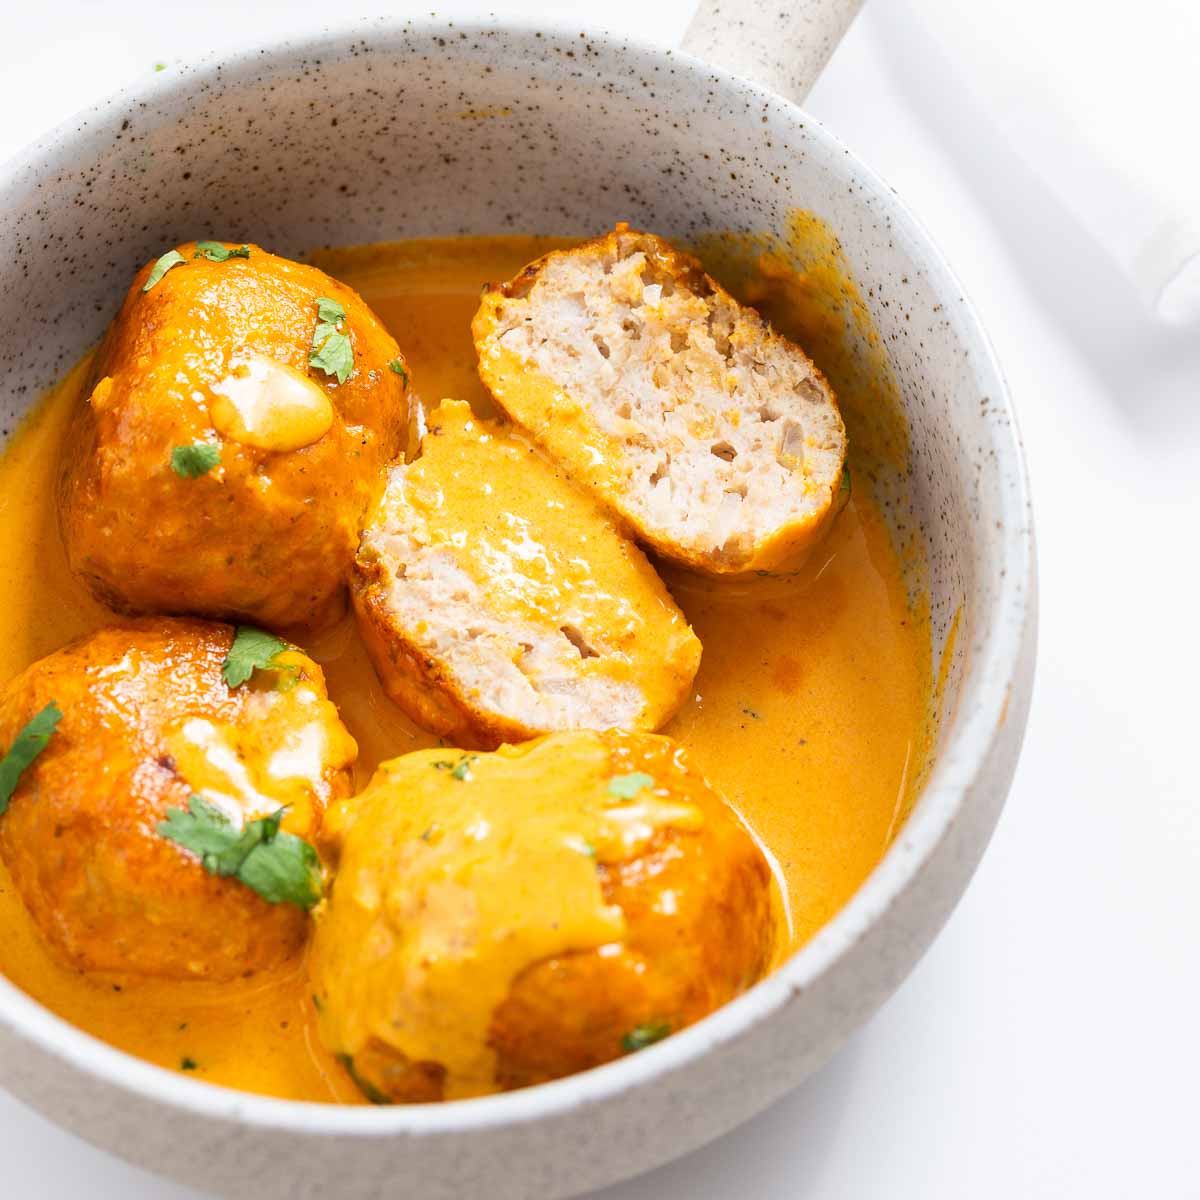 A bowl of butter chicken meatballs in a creamy sauce.